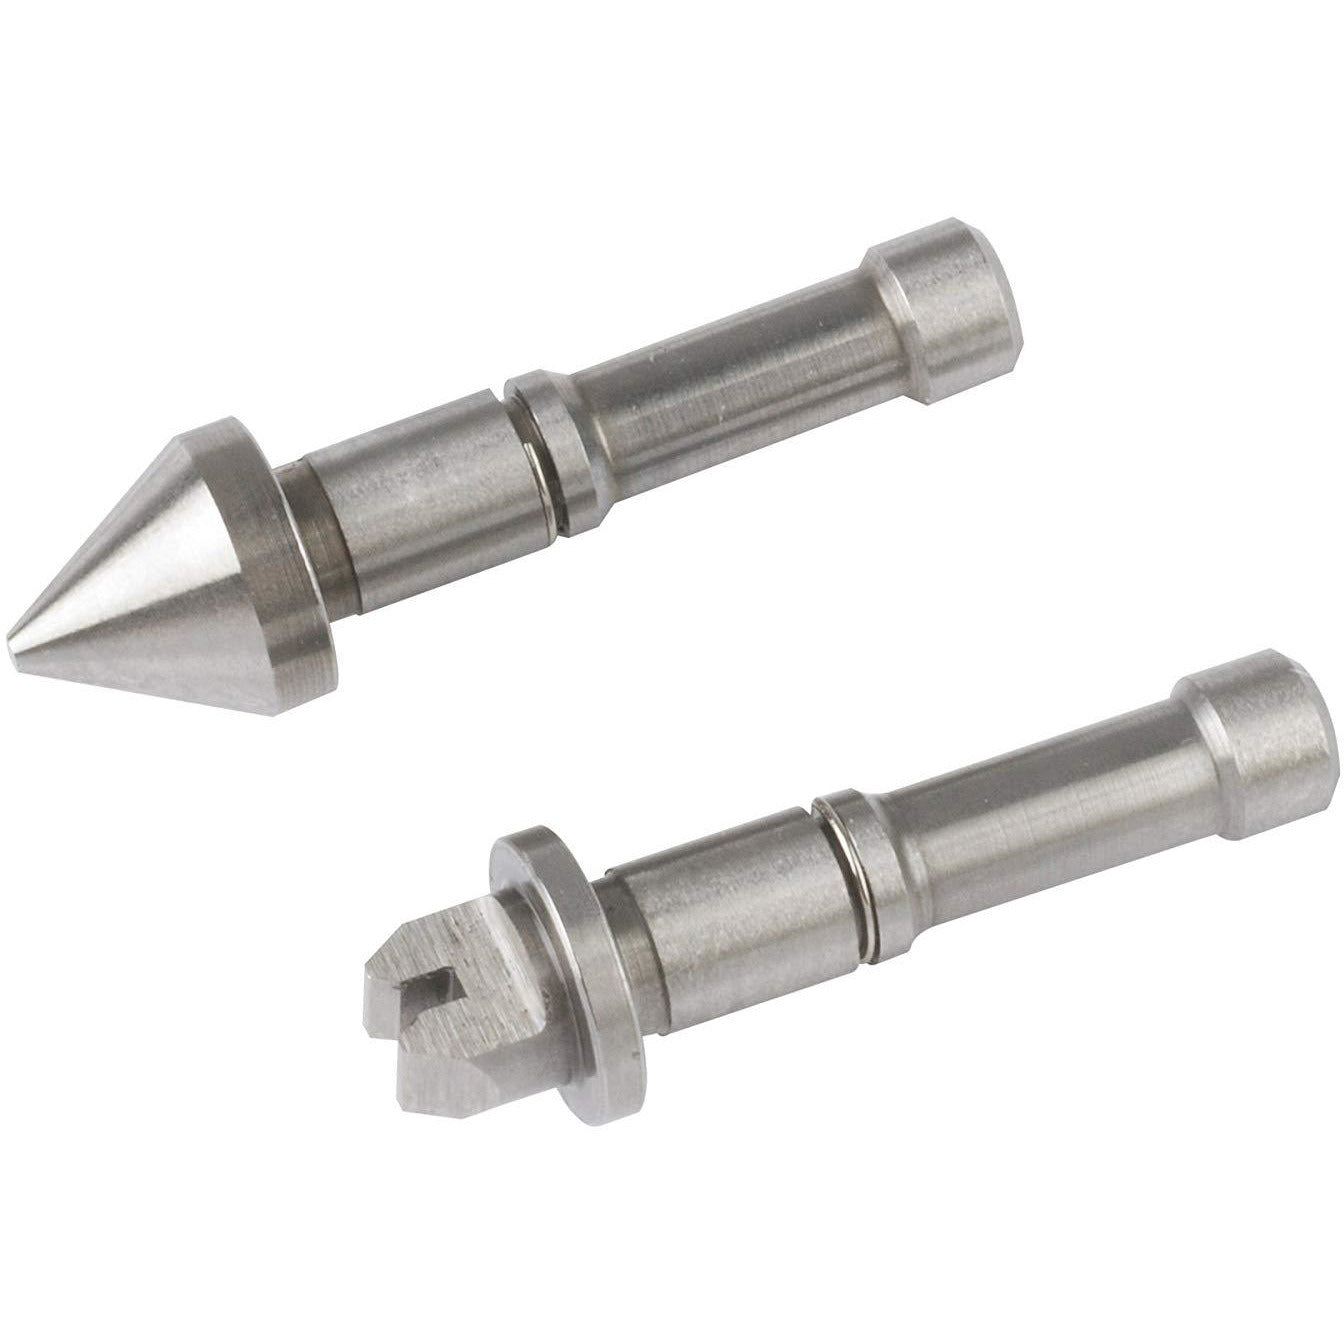 Mitutoyo Anvil and Spindle Tip 2-3mm/13-9TPI-Mitutoyo-Tool Factory